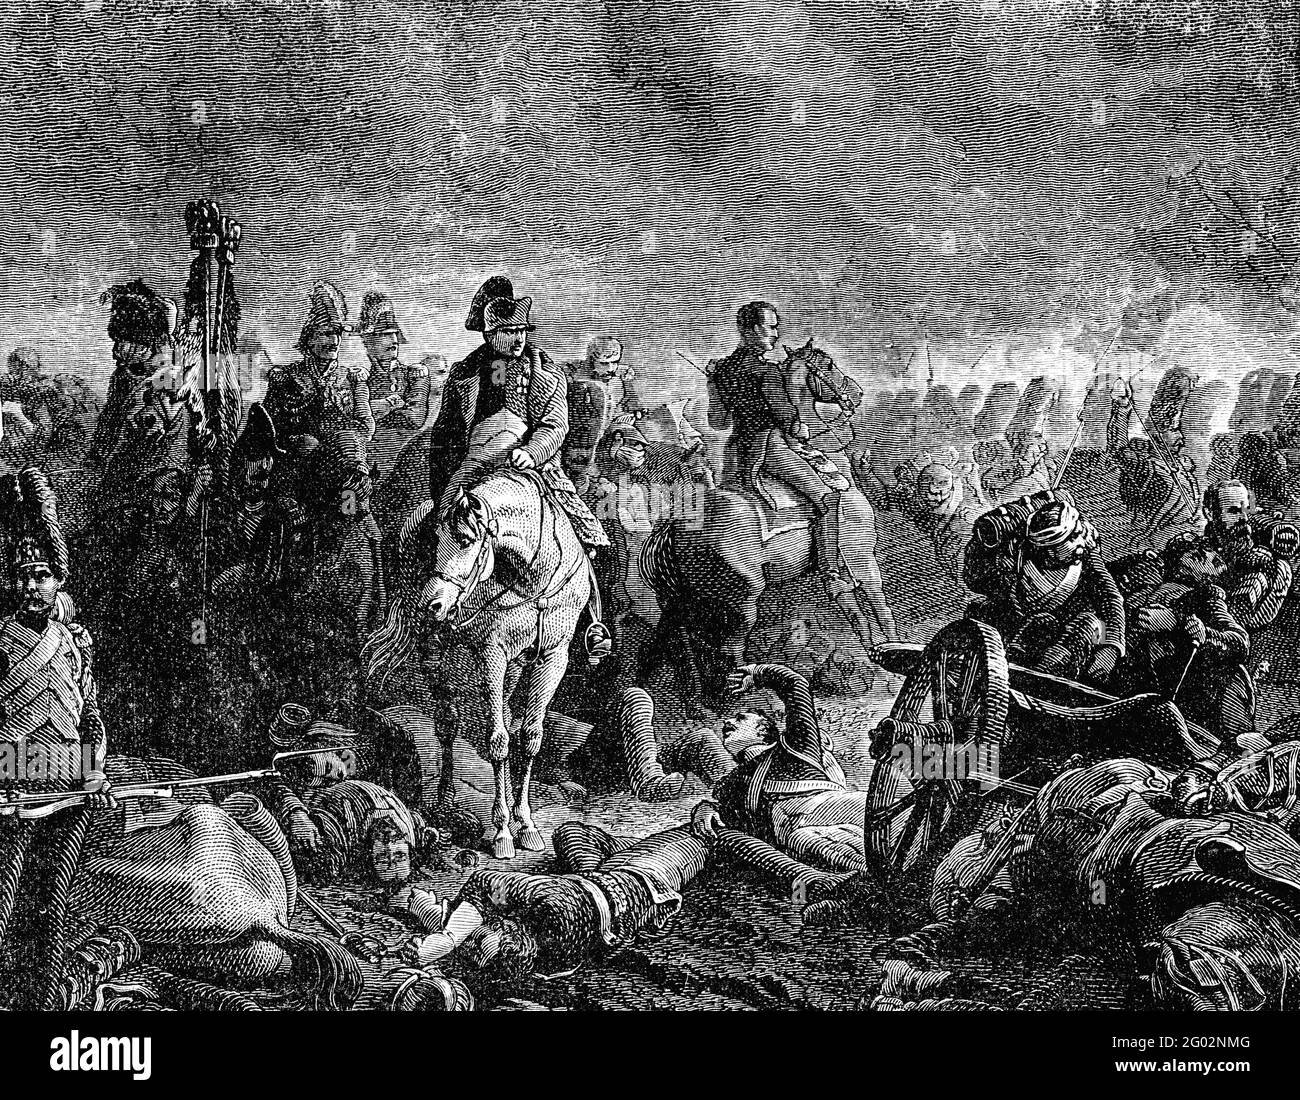 An engraved vintage illustration image of Napoleon Bonaparte with his army at the Battle of Waterloo, from a Victorian book dated 1883 that is no long Stock Photo